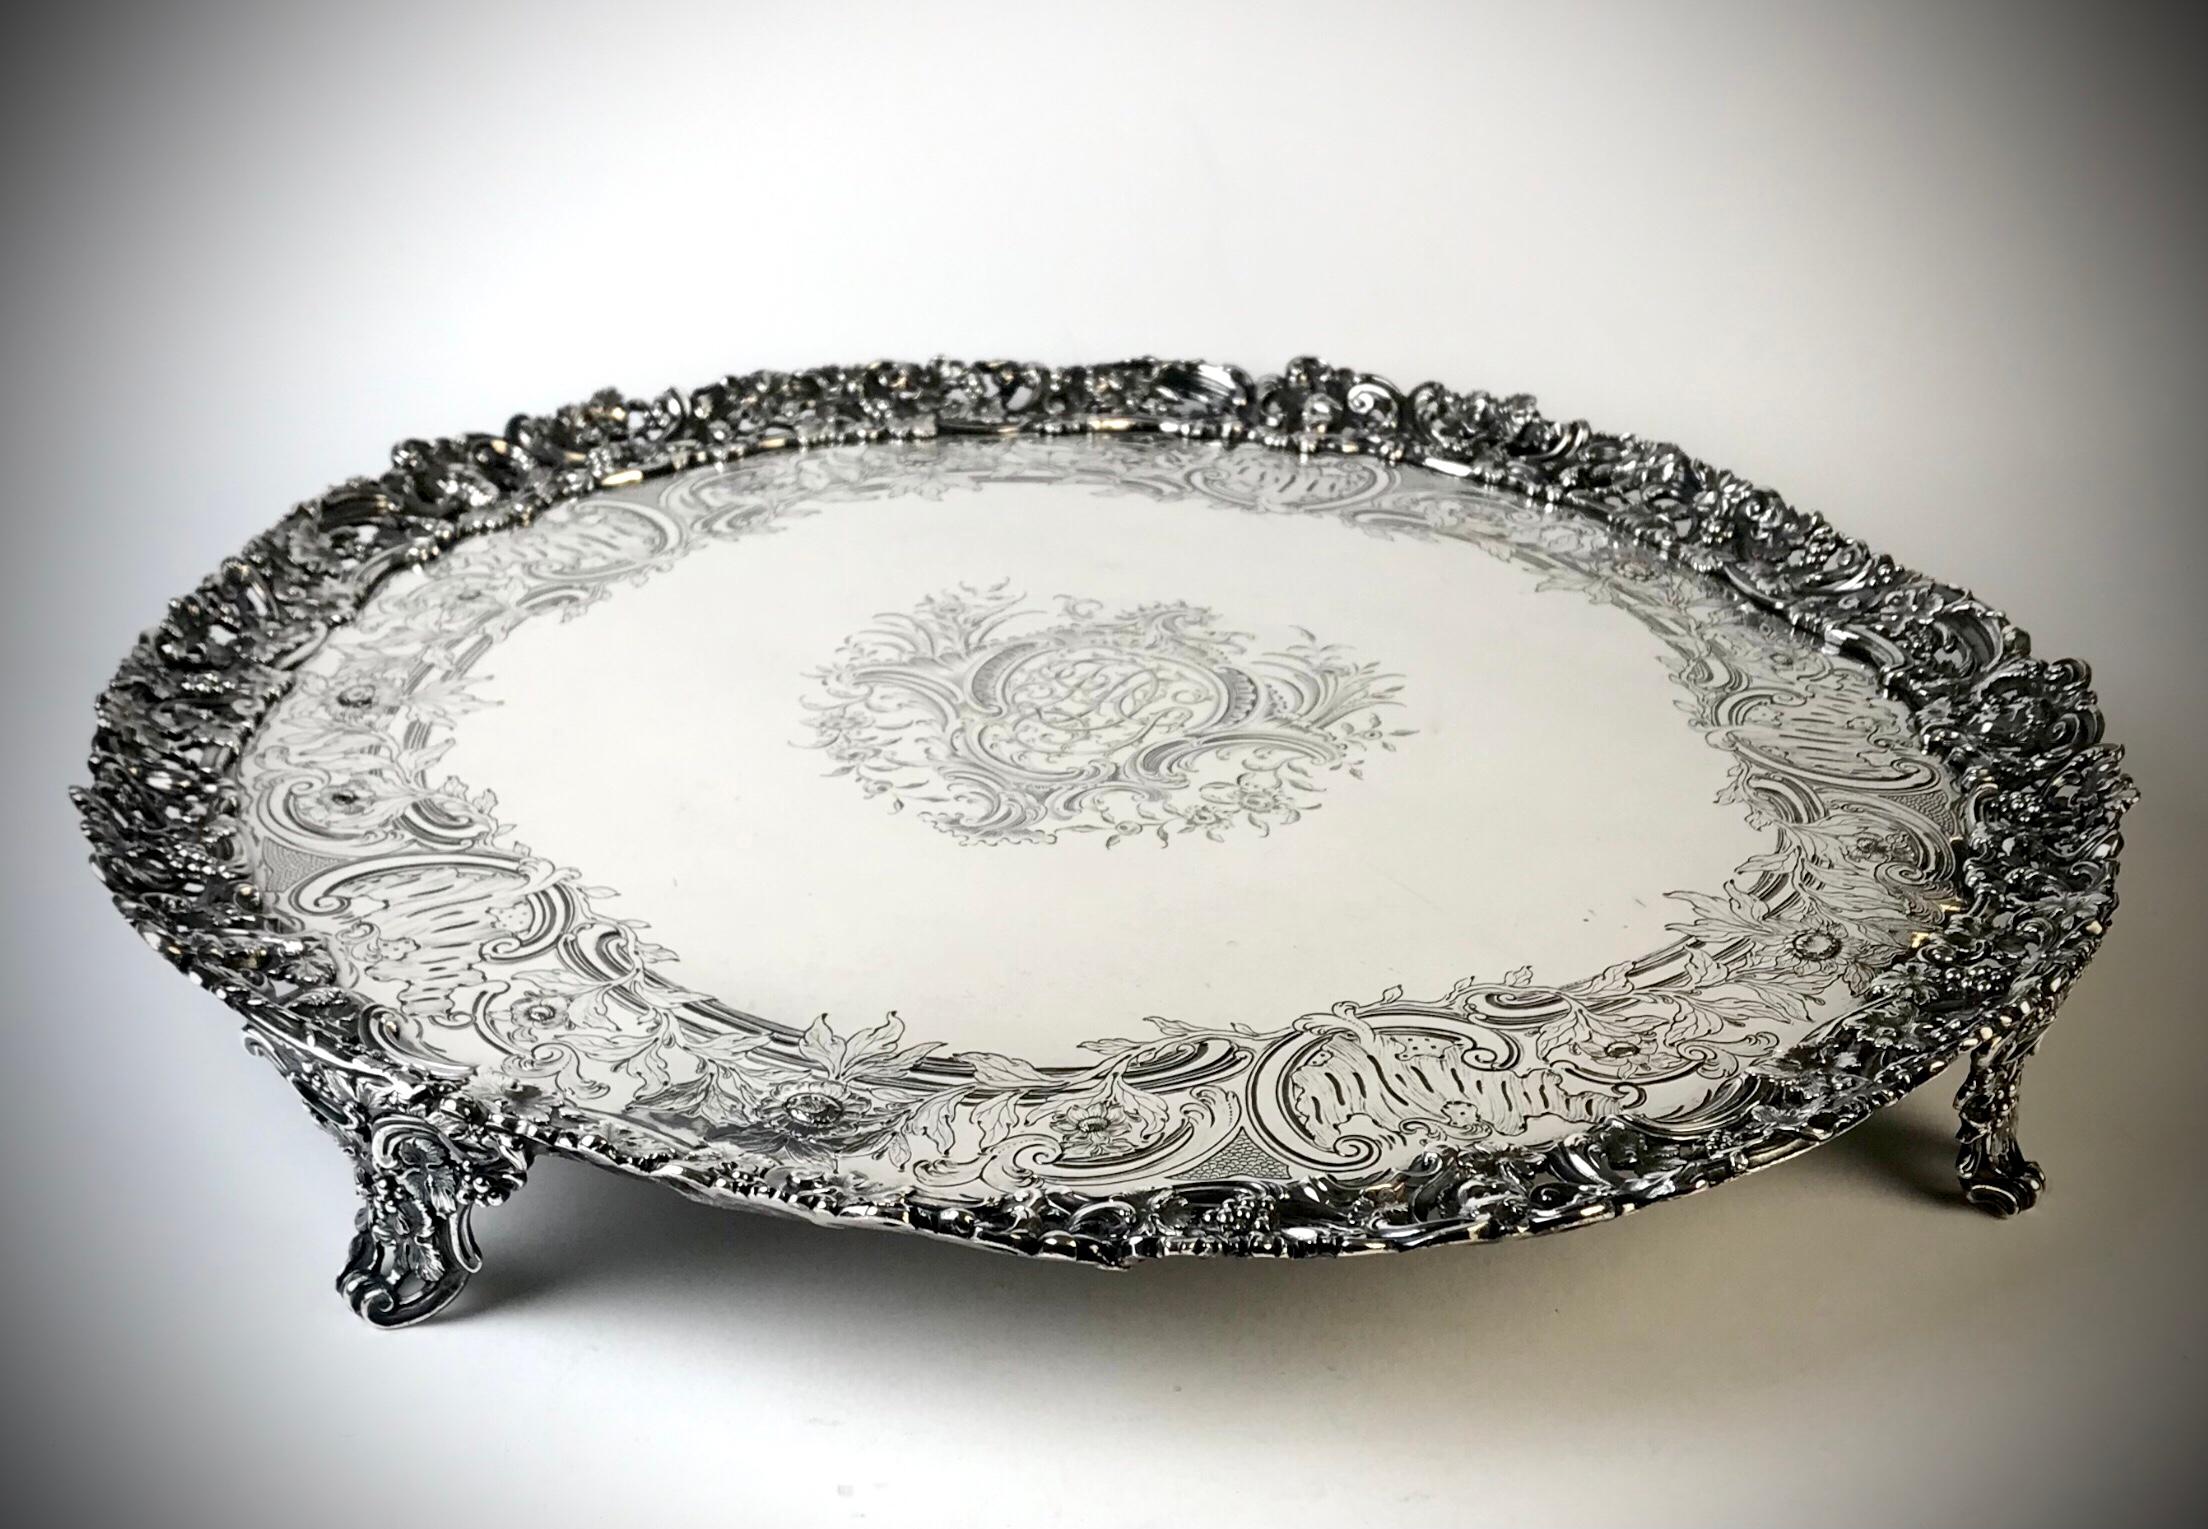 Hammered Magnificent Georgian Large Solid Silver Sterling Salver London 1762 Courtauld